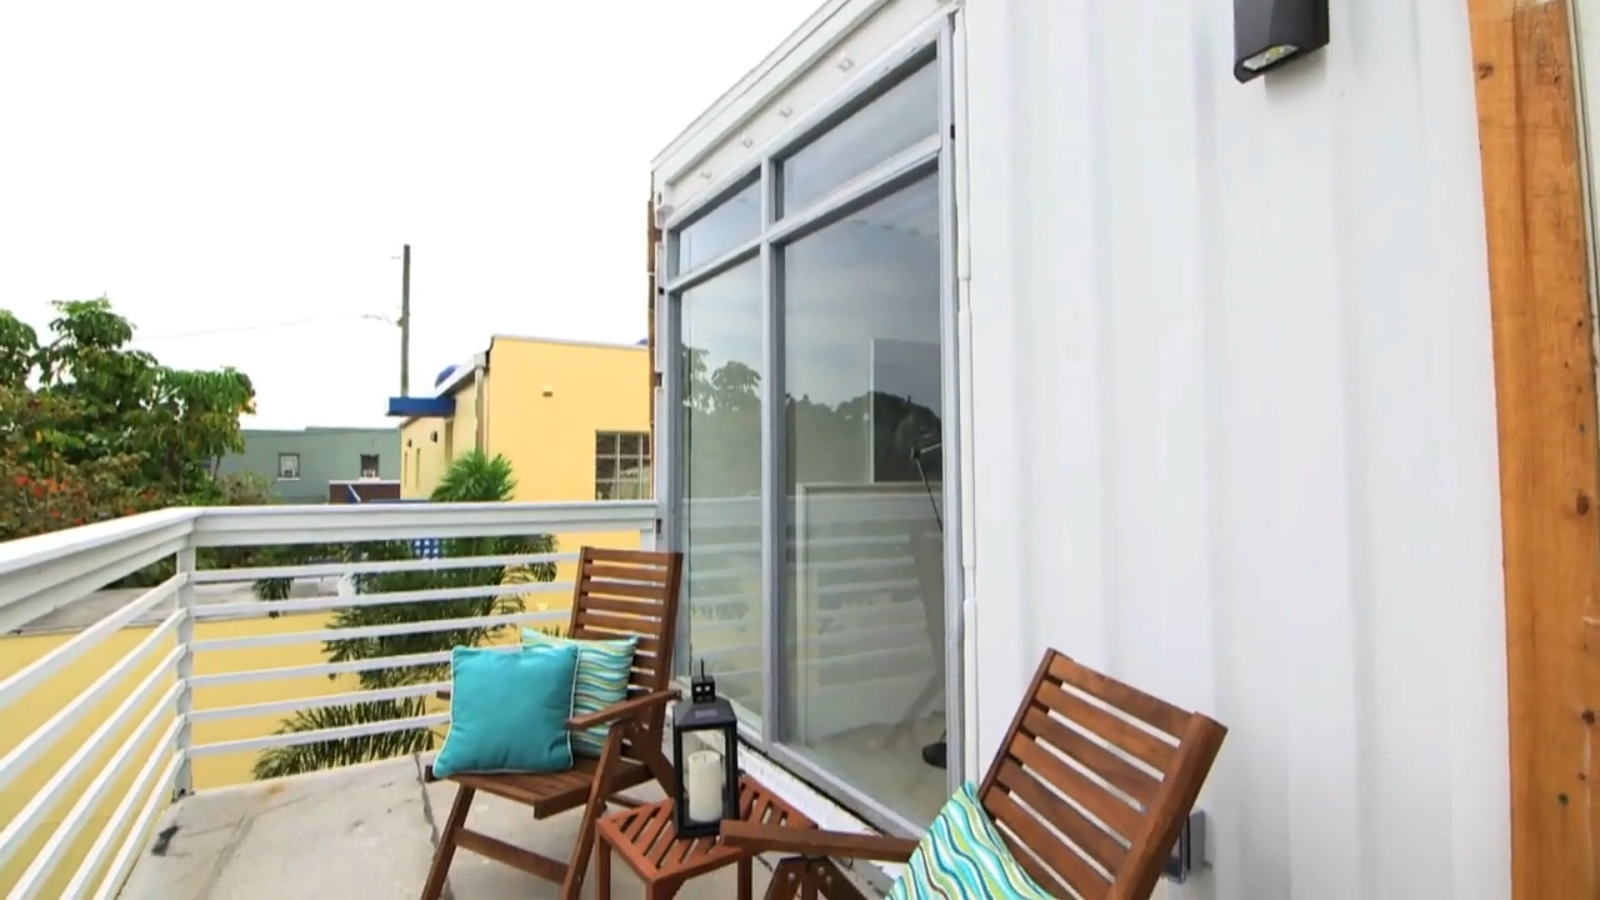 Best Prefab Modular Shipping Container Homes: Shipping Container Home